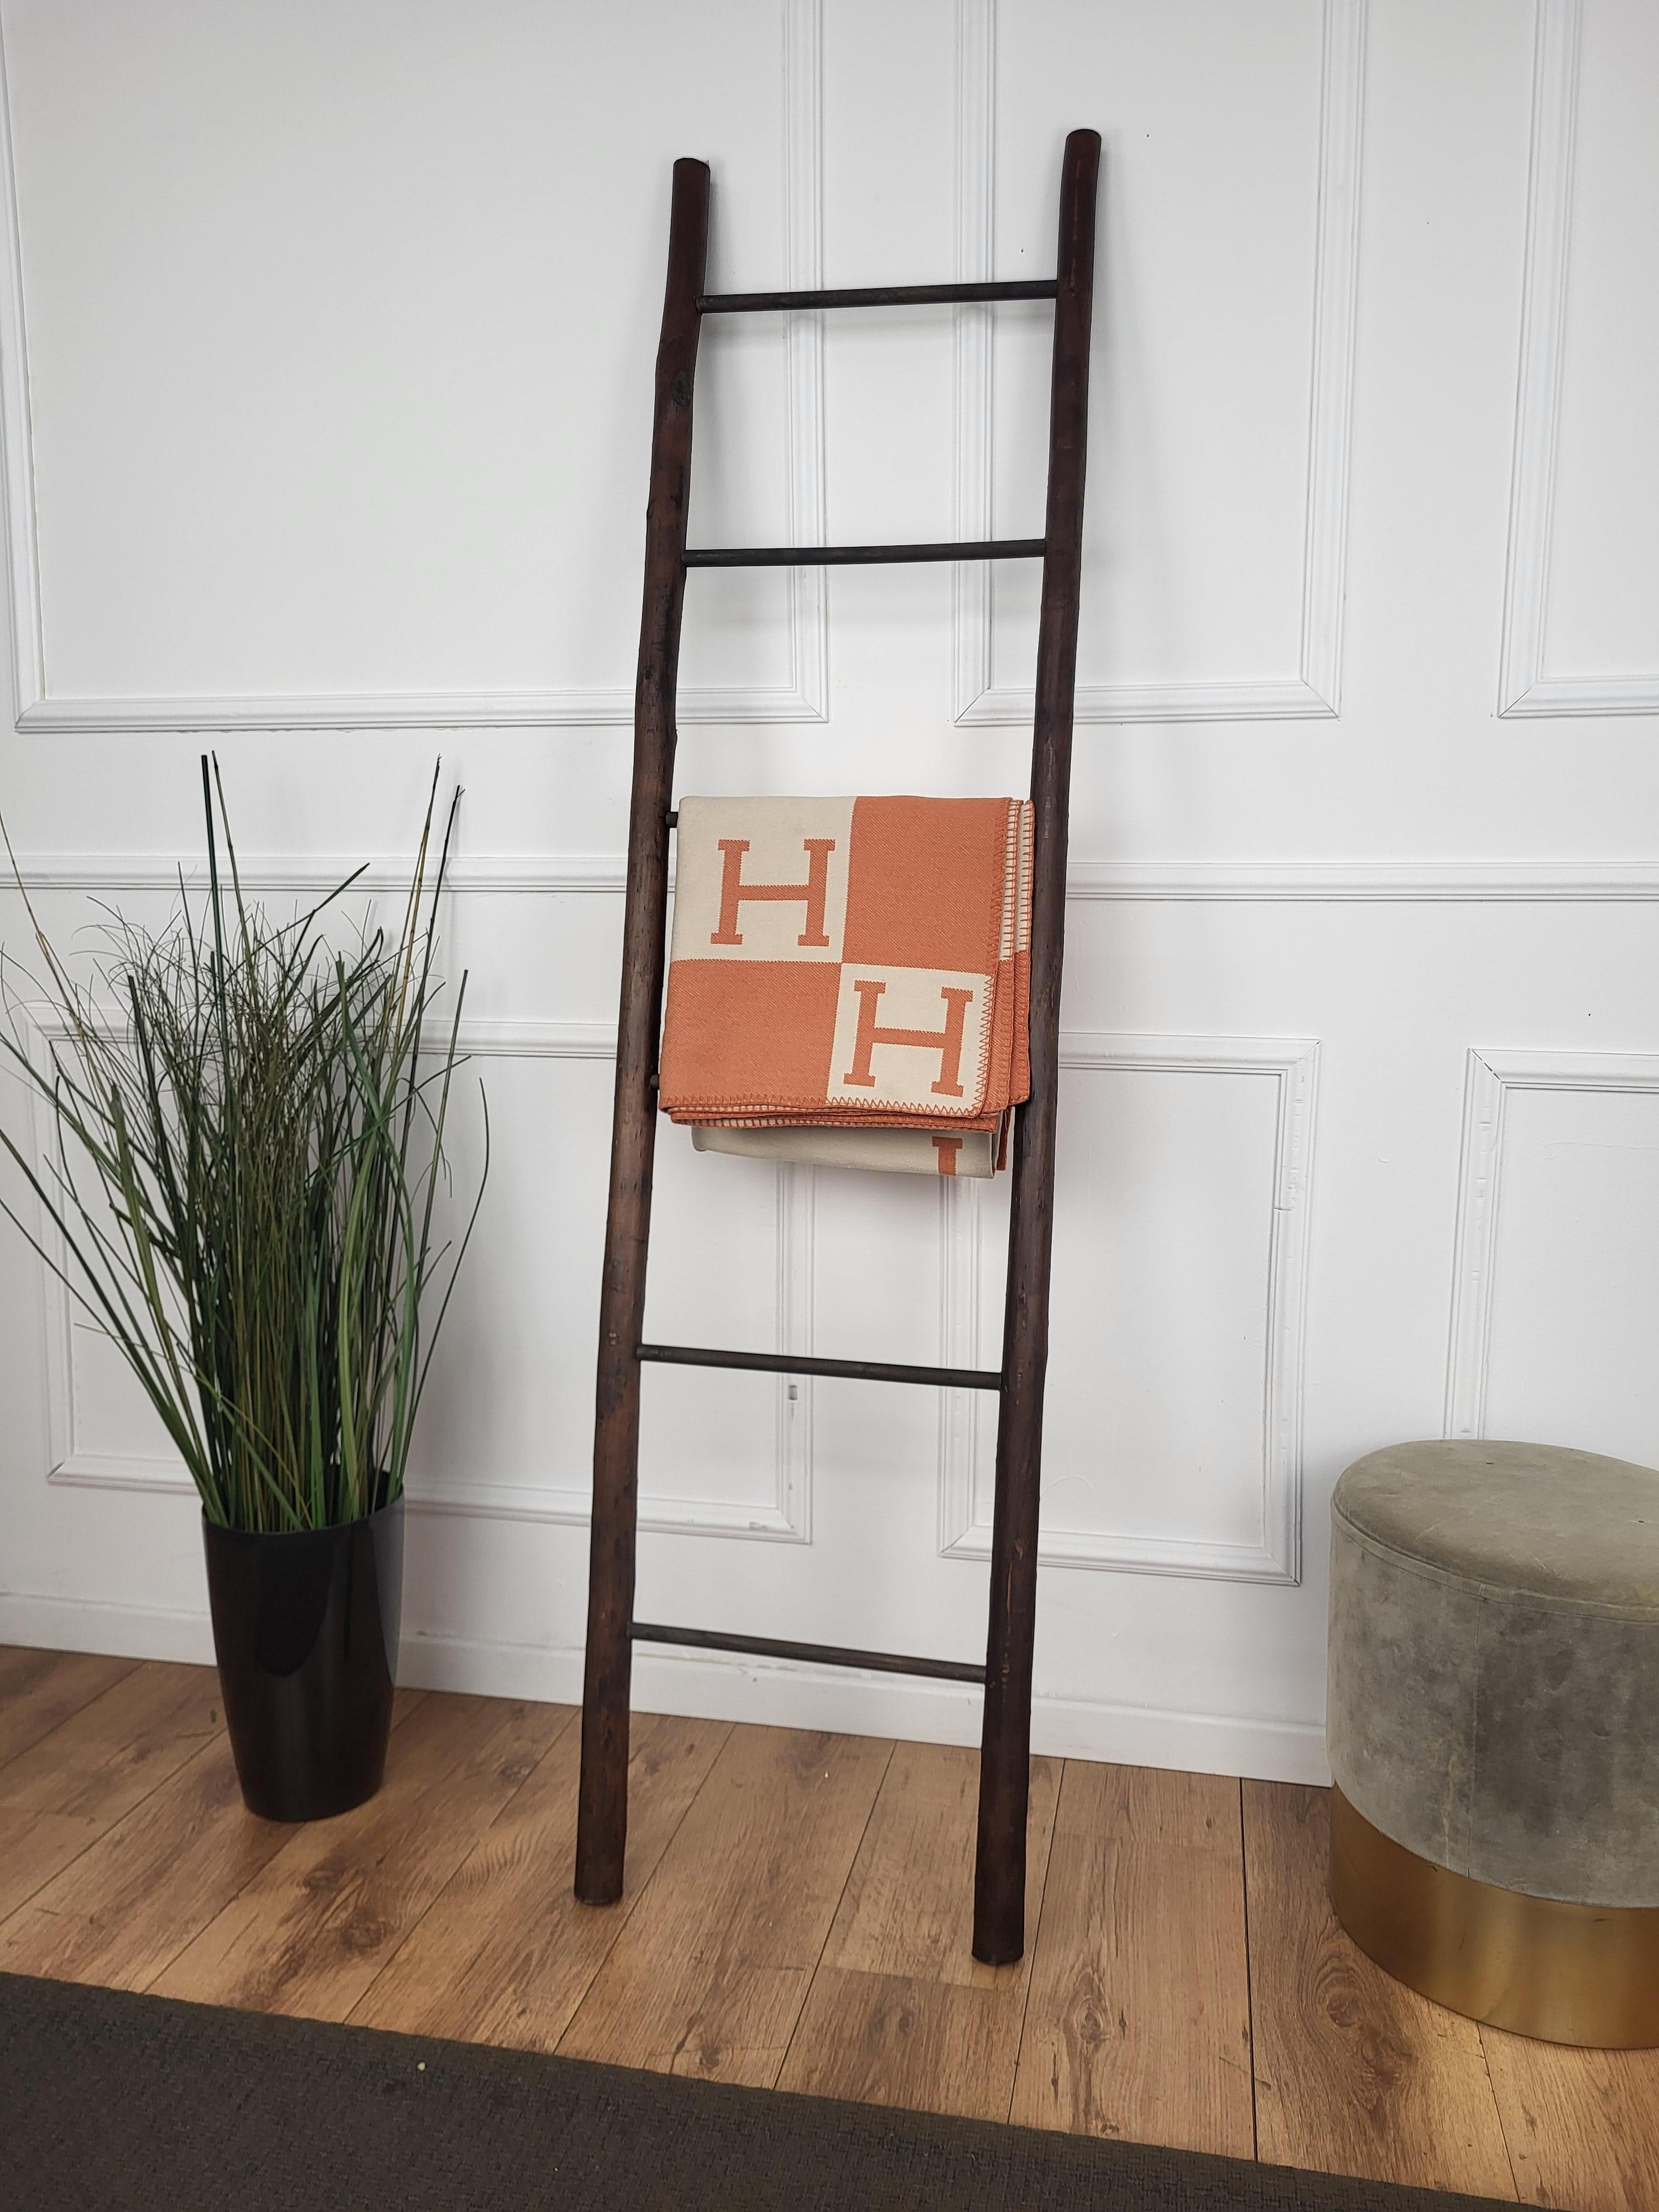 Beautiful rustic ladder crafted of sturdy wood with a simple design and nice patina. Sure to bring lots of character and rustic elegance to any room using minimal space. Great for displaying blankets, towels, lights and holiday decor, or perfect